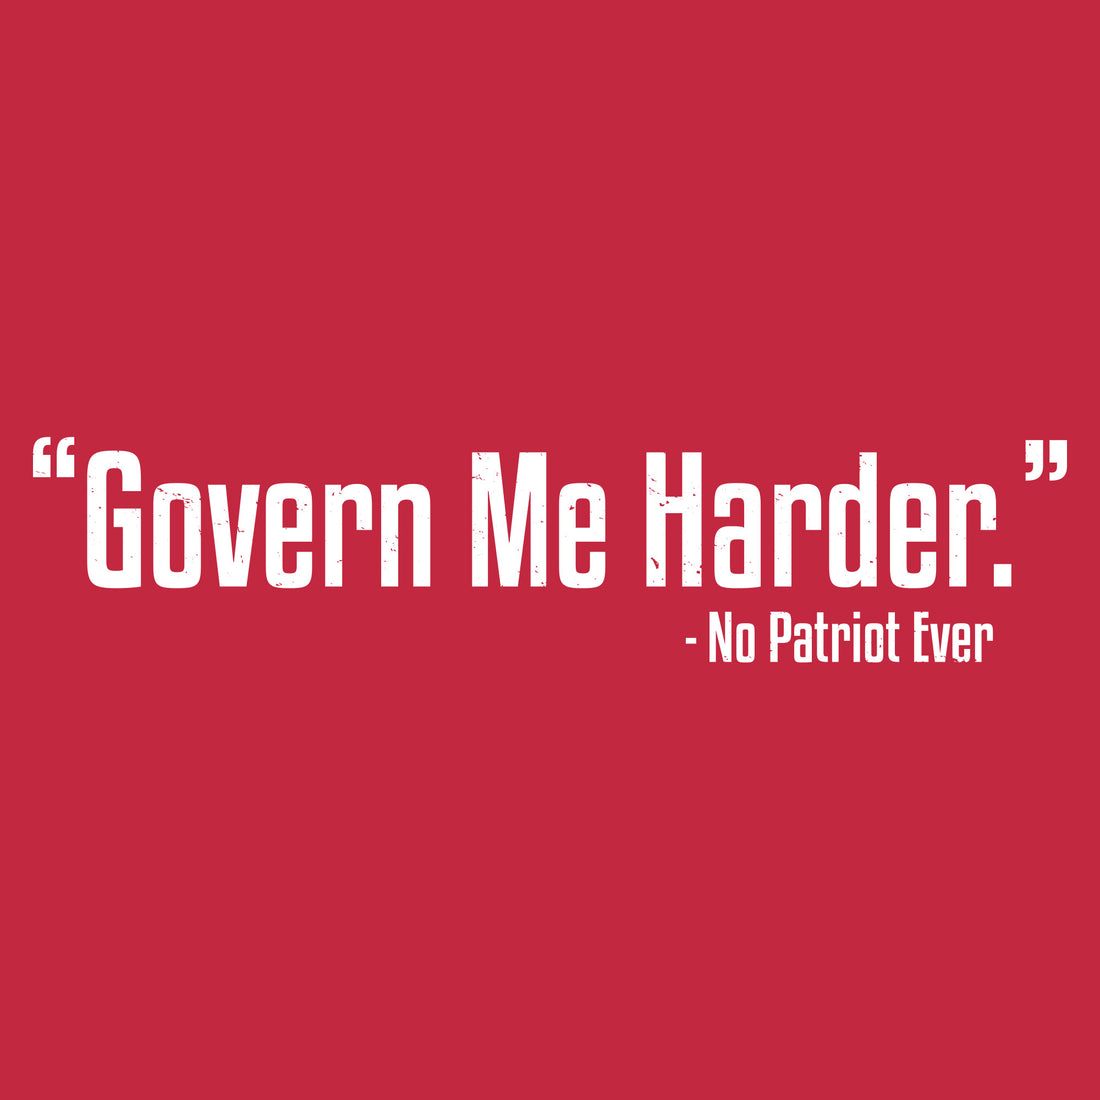 Govern Me Harder T-Shirt - Red